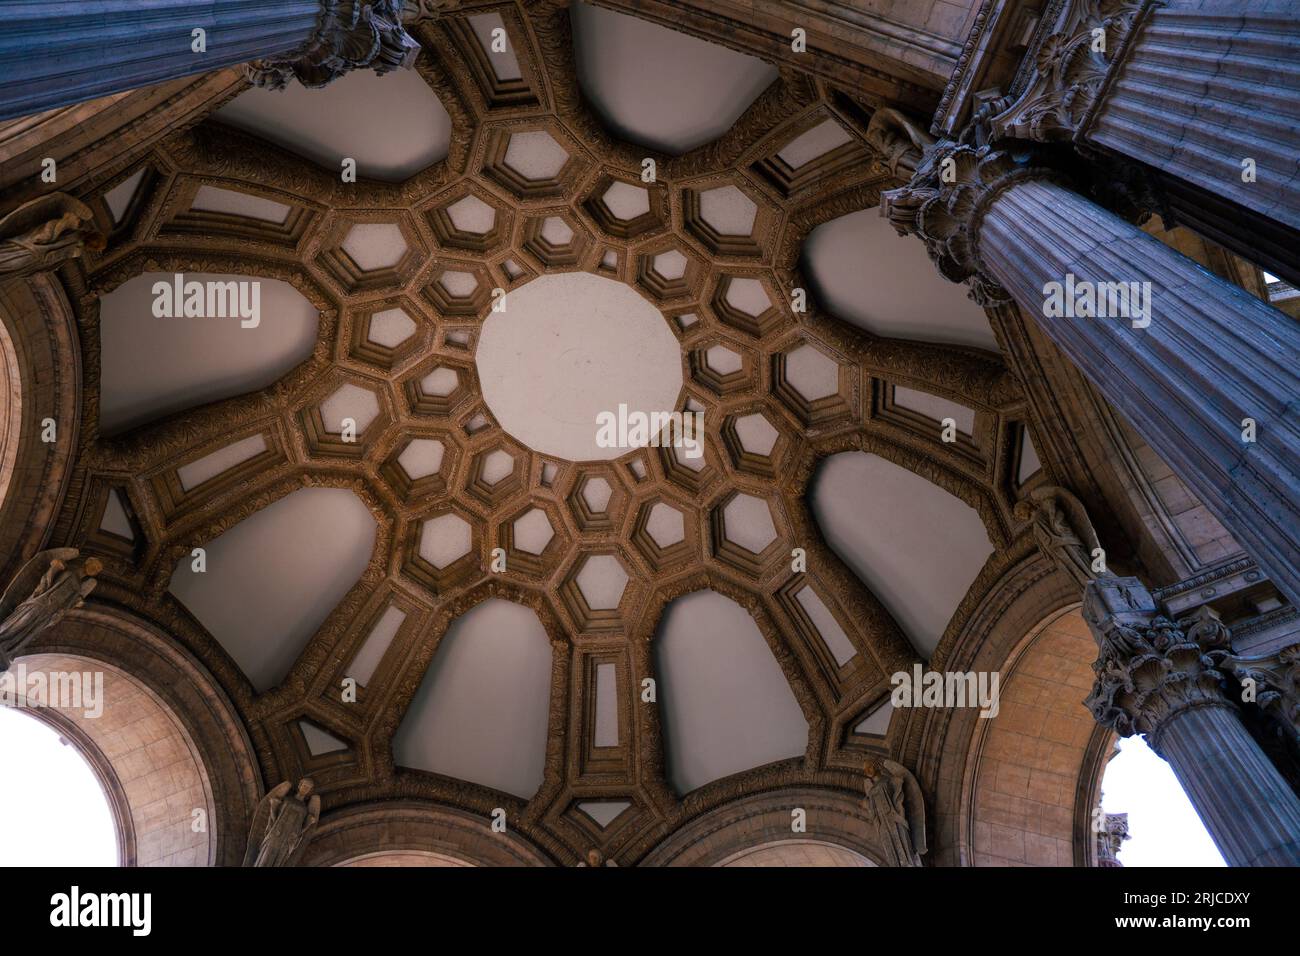 A distinctive architectural structure with ornate columns and intricate ceiling designs Stock Photo